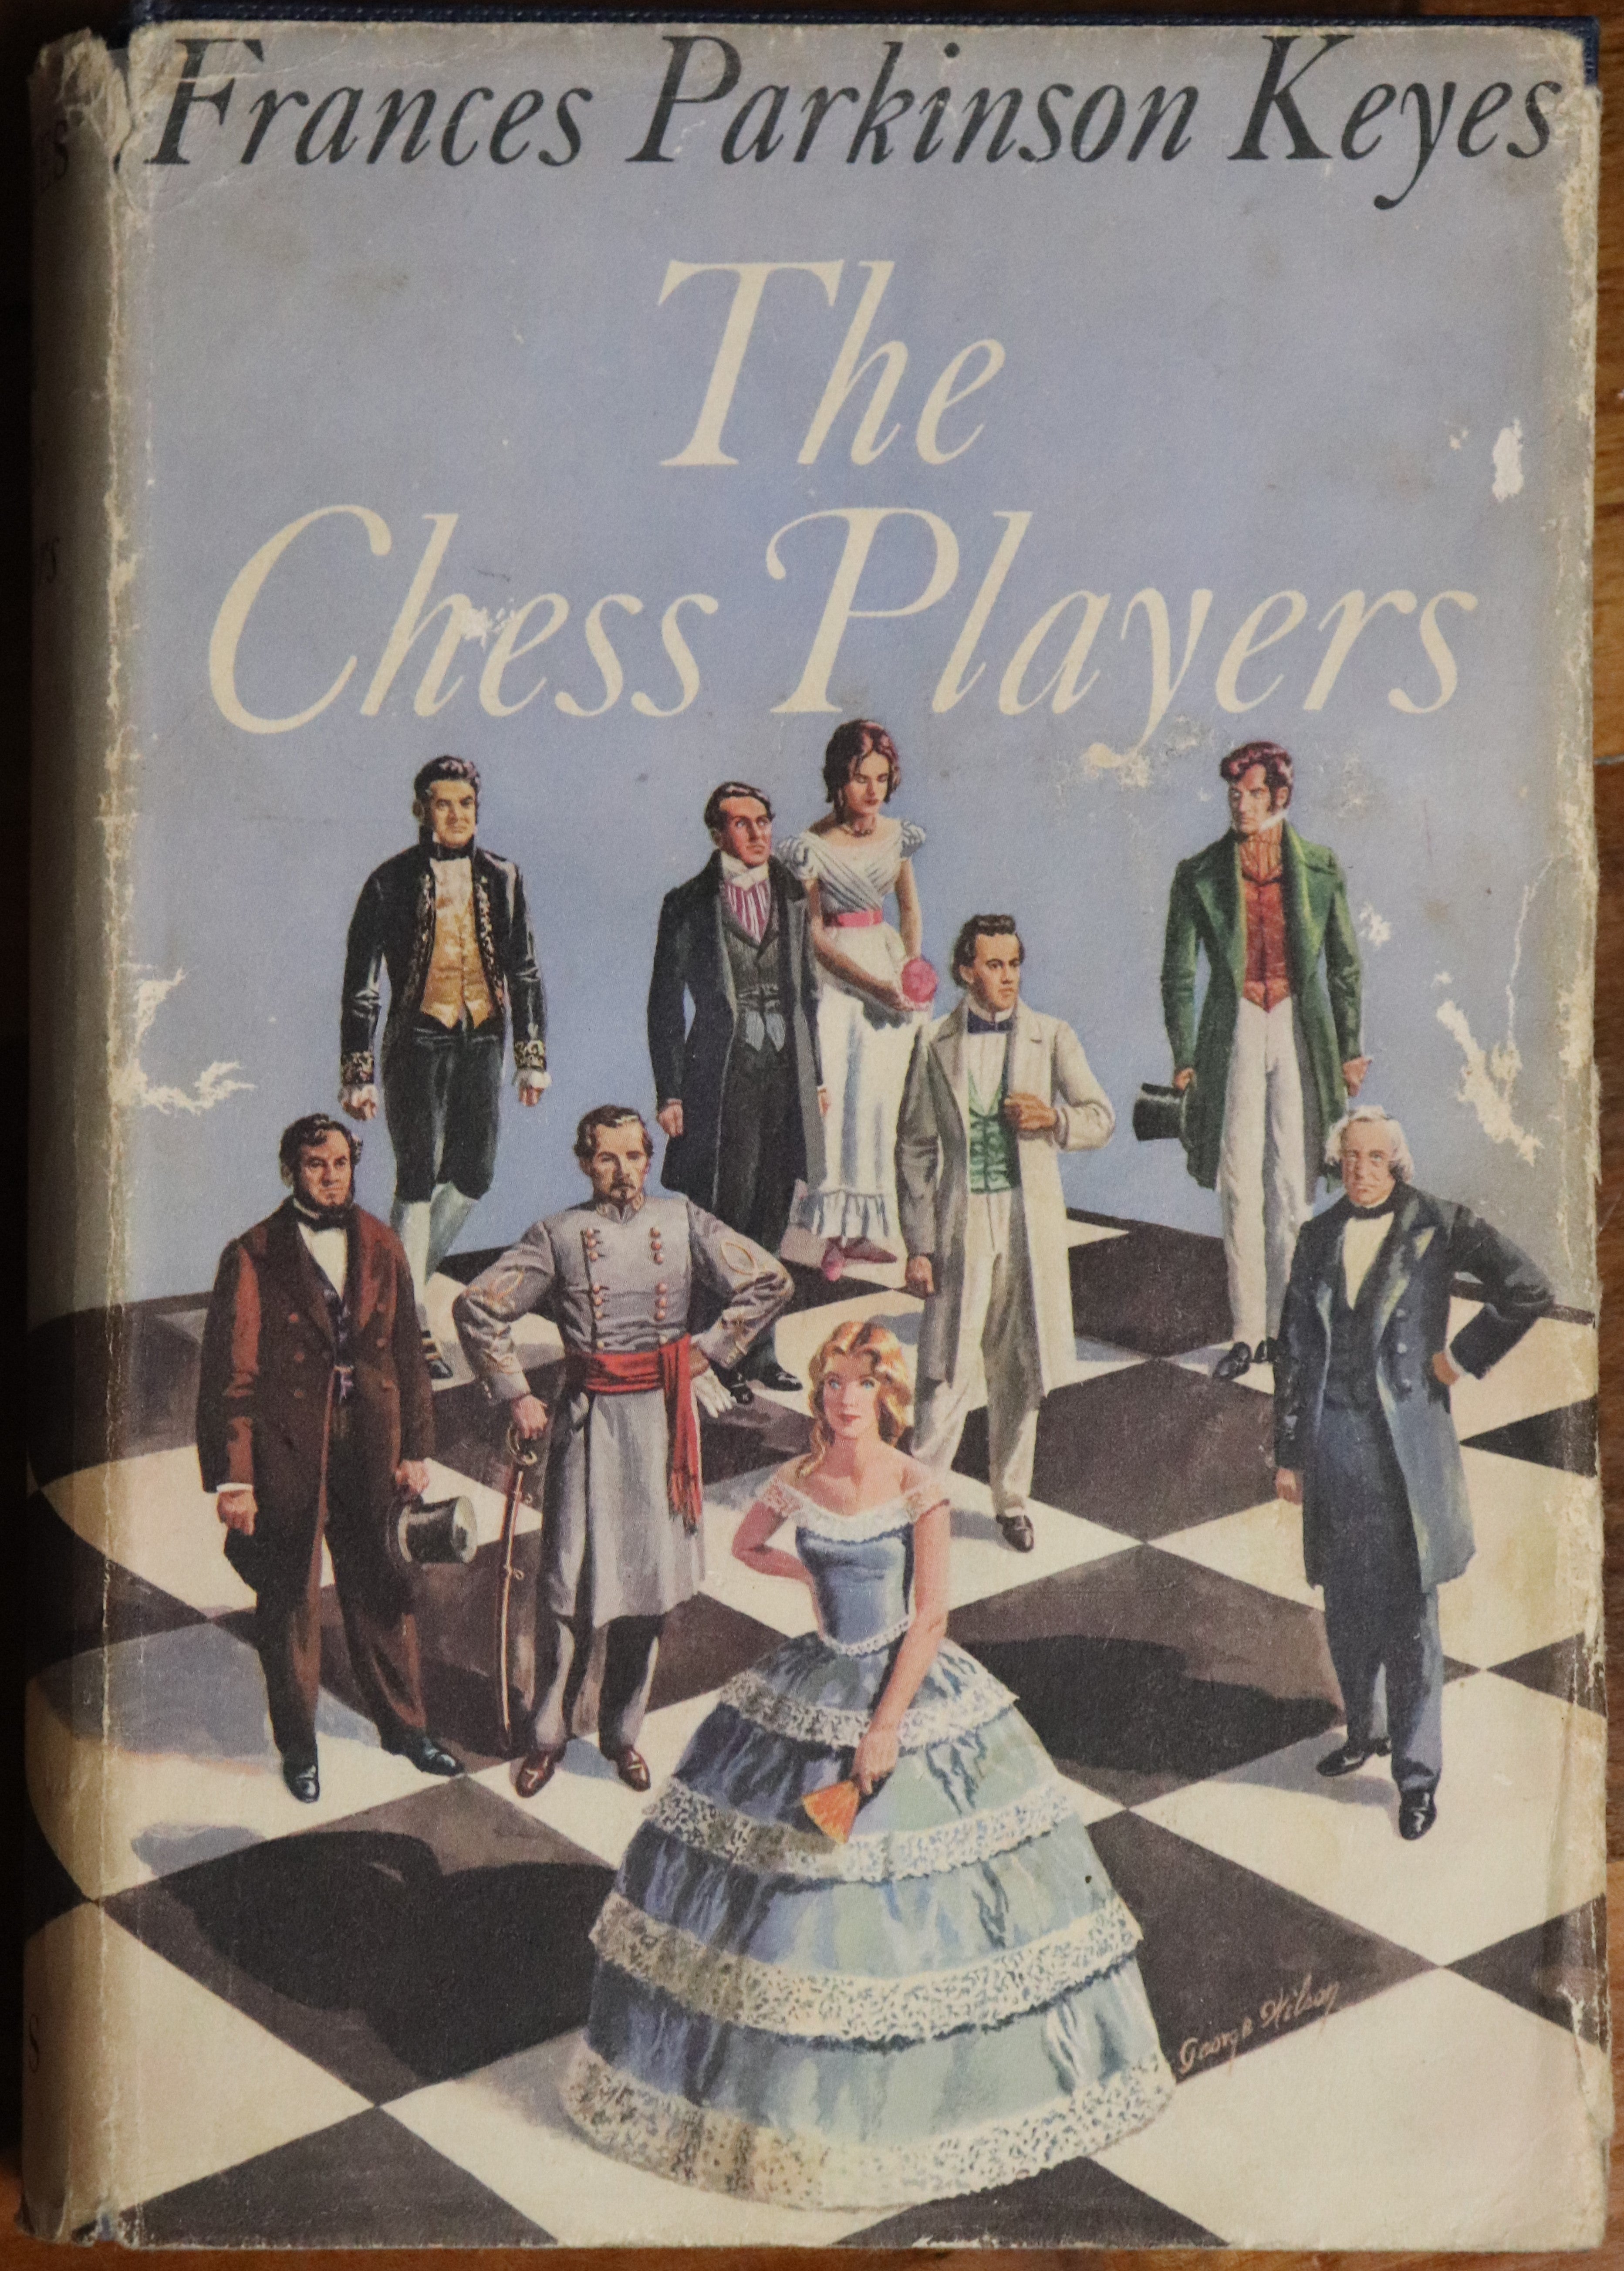 The Chess Players by FP Keyes - 1961 - 1st Edition Vintage Literature Book